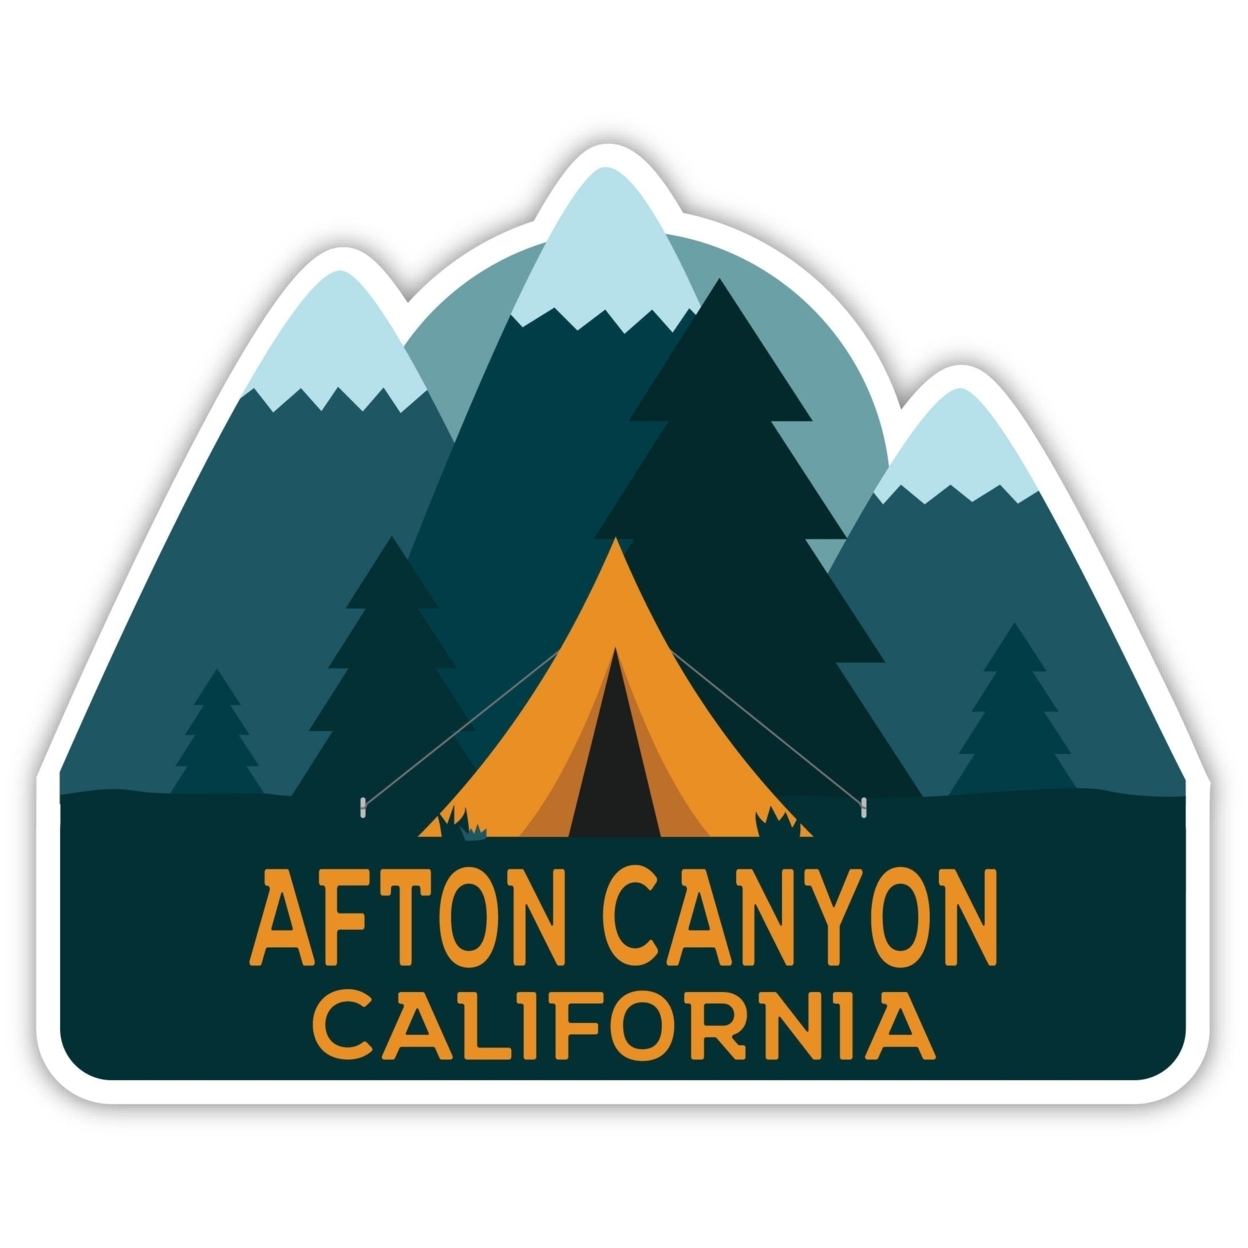 Afton Canyon California Souvenir Decorative Stickers (Choose Theme And Size) - 4-Pack, 4-Inch, Tent